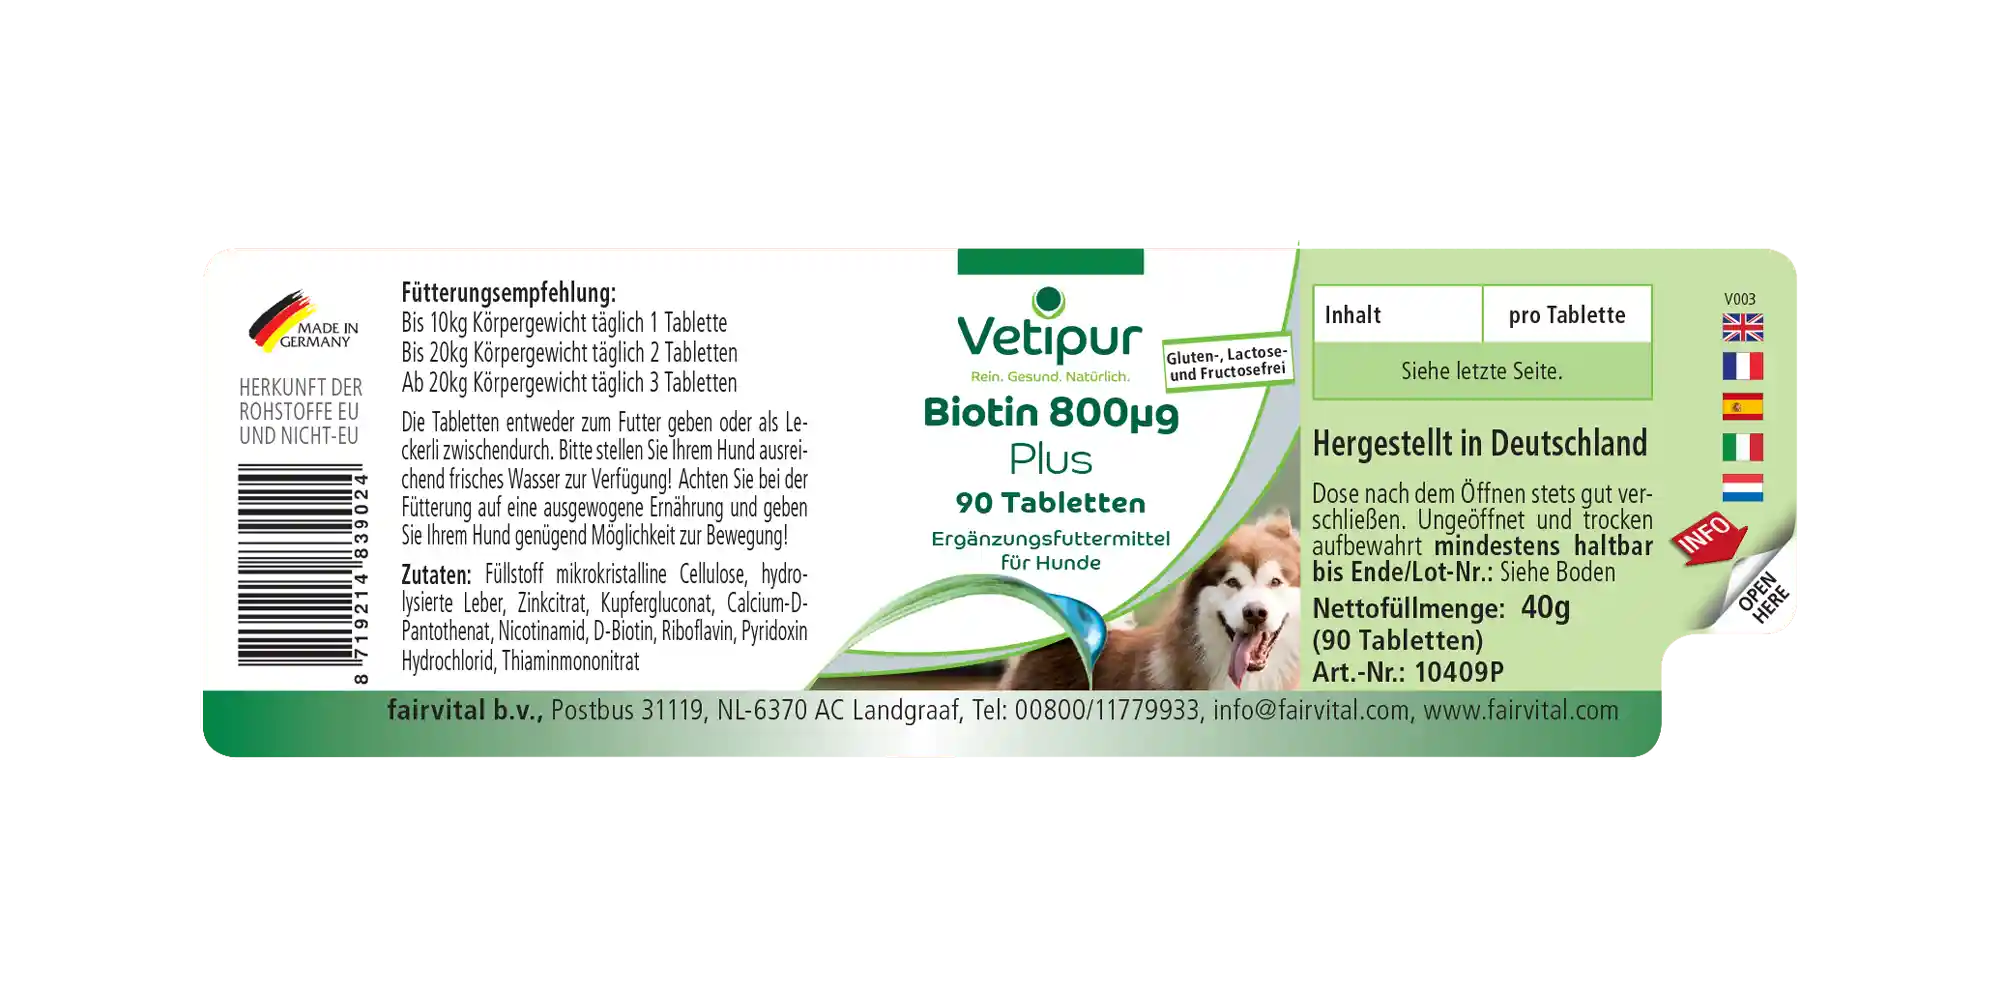 Biotin 800µg with vital substances - 90 tablets for dogs | Vetipur